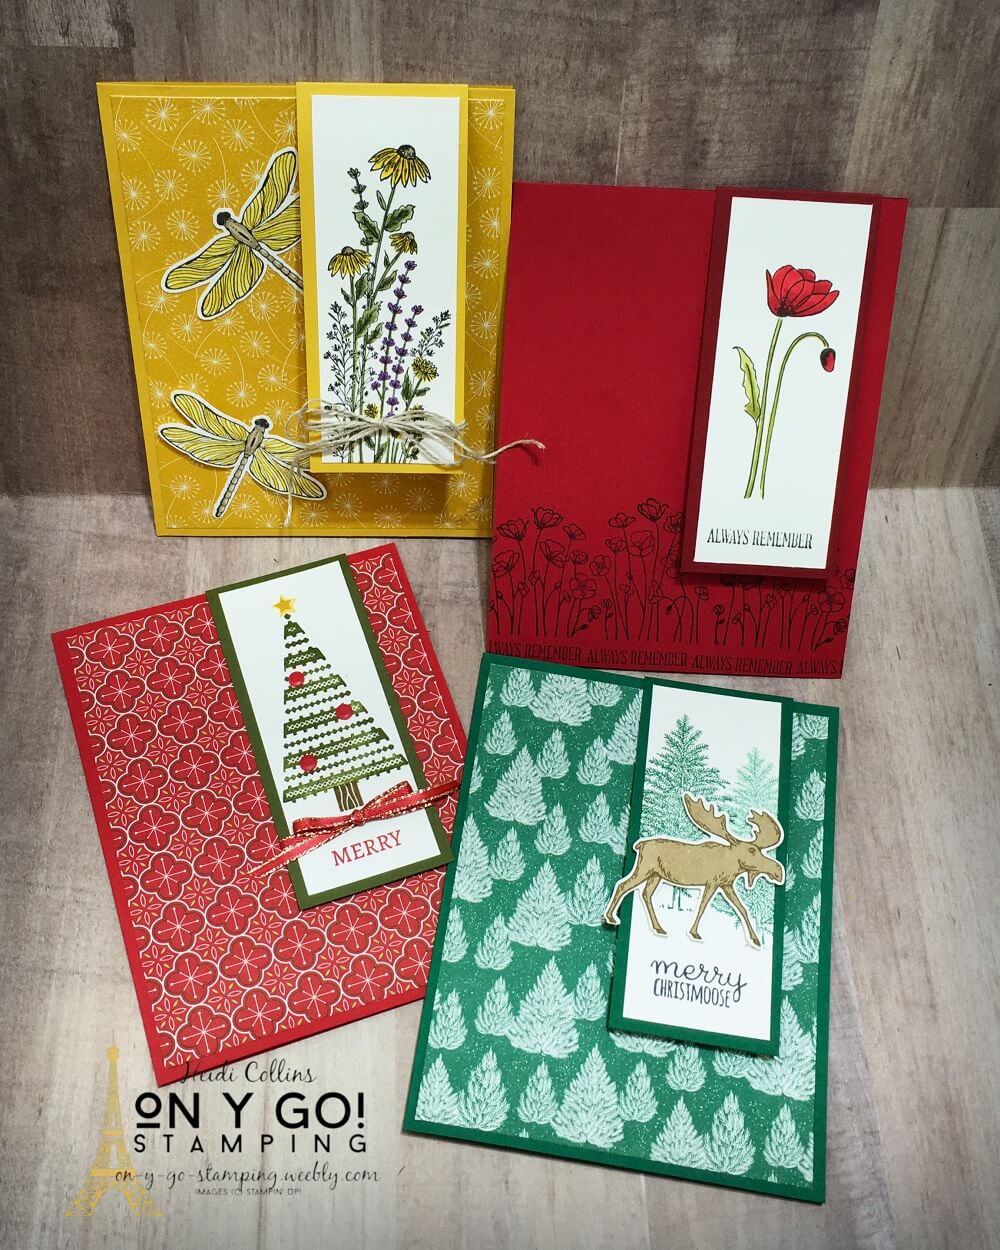 4 Card making ideas using a quick and easy fun fold card design. These samples feature the Painted Poppies, Merry Moose, Tree Angle, and NEW Dragonfly Garden stamp sets from Stampin' Up!